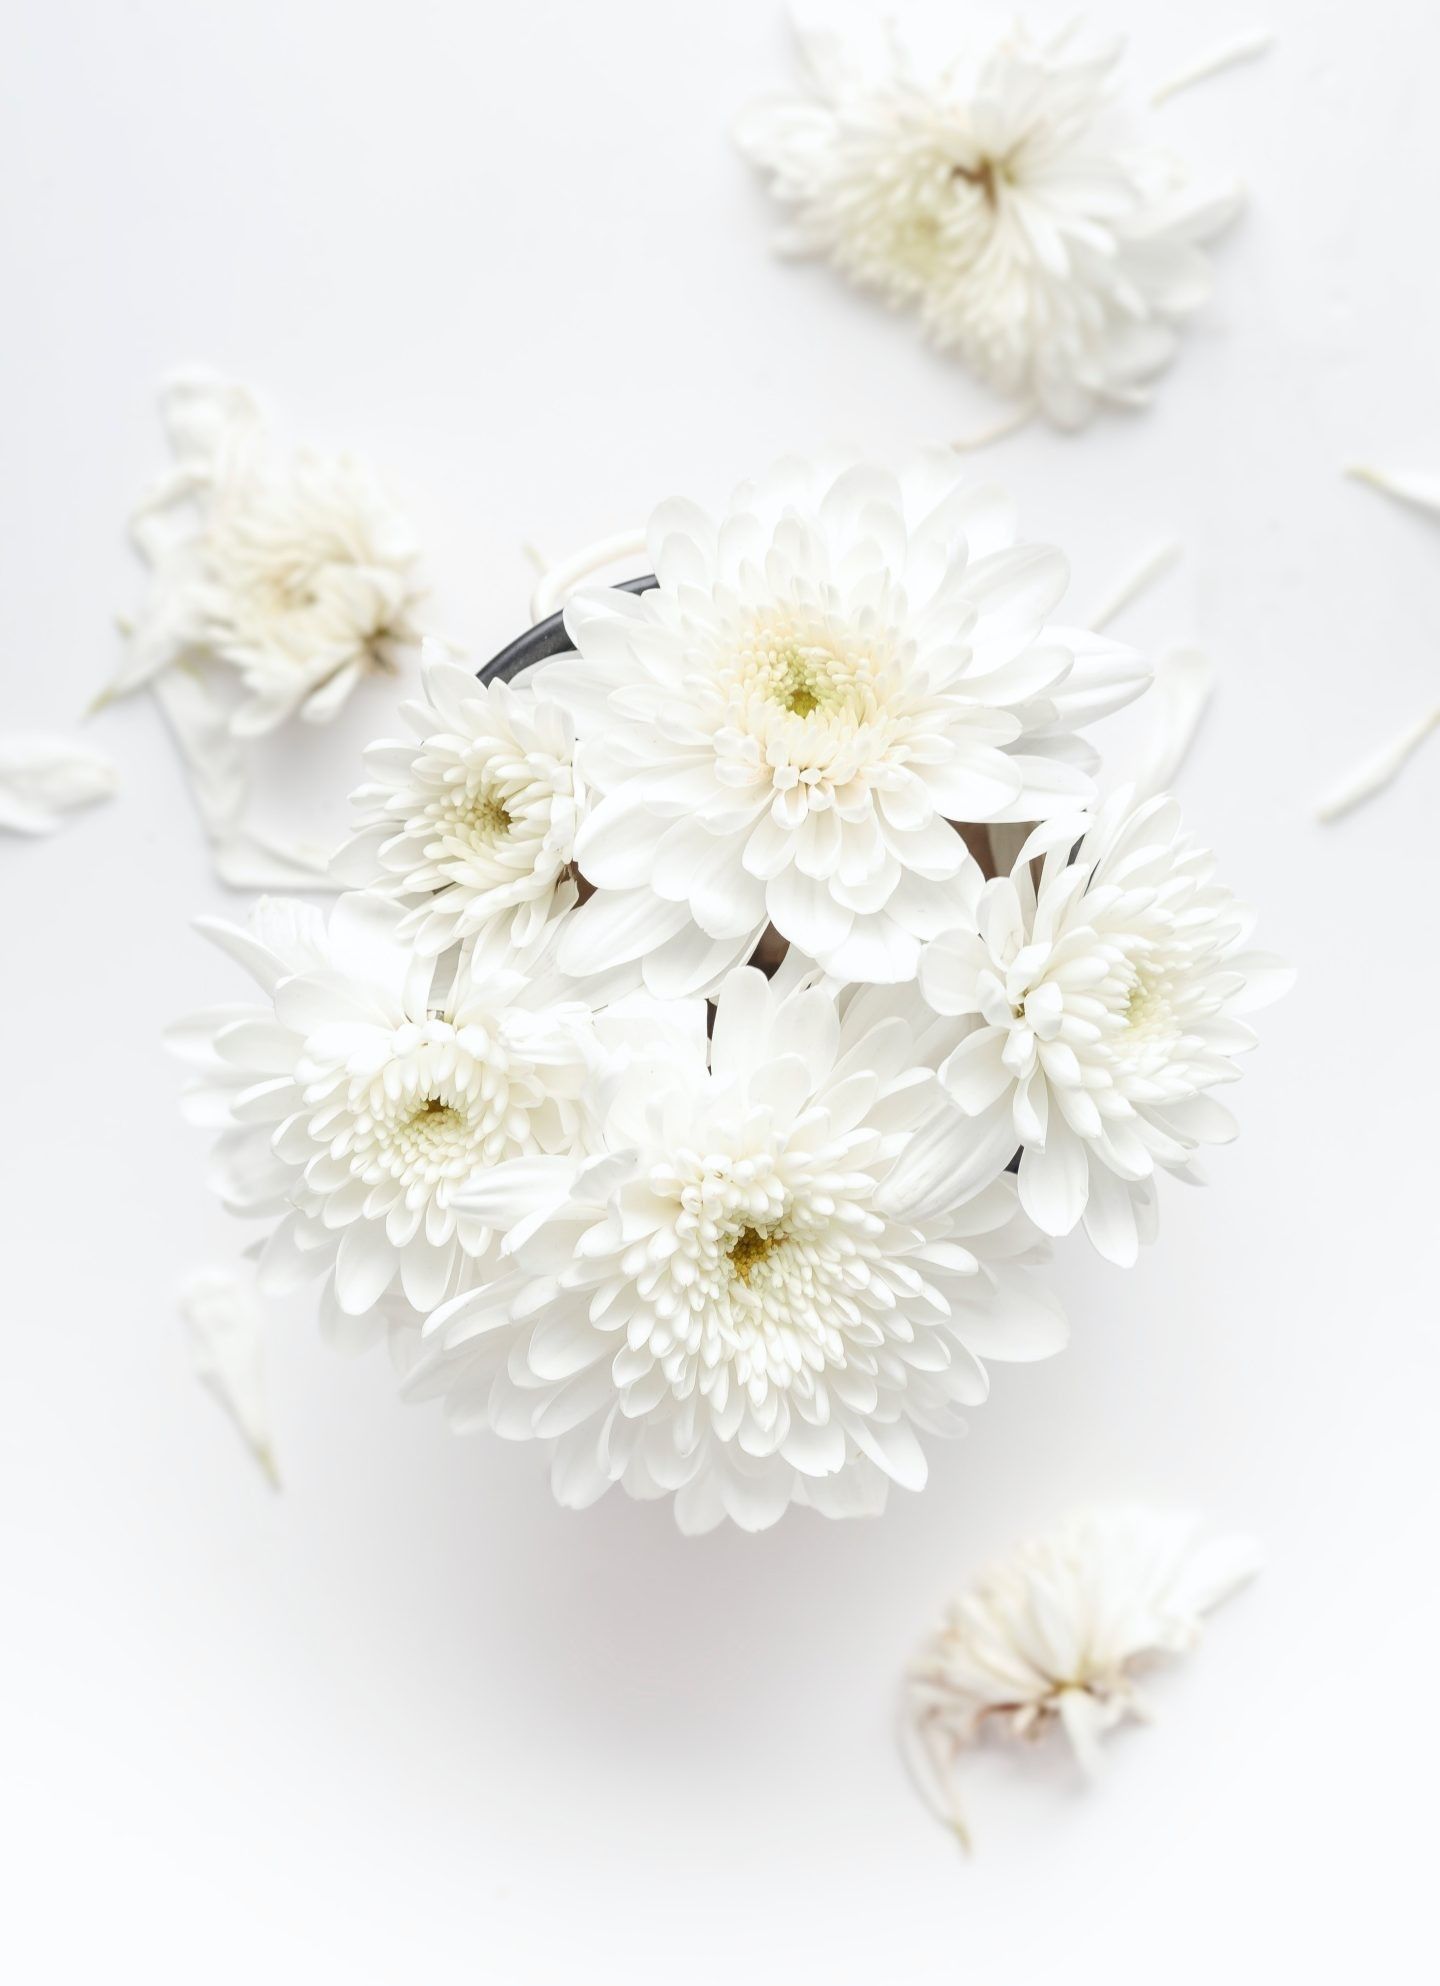 A vase of white flowers on top - White